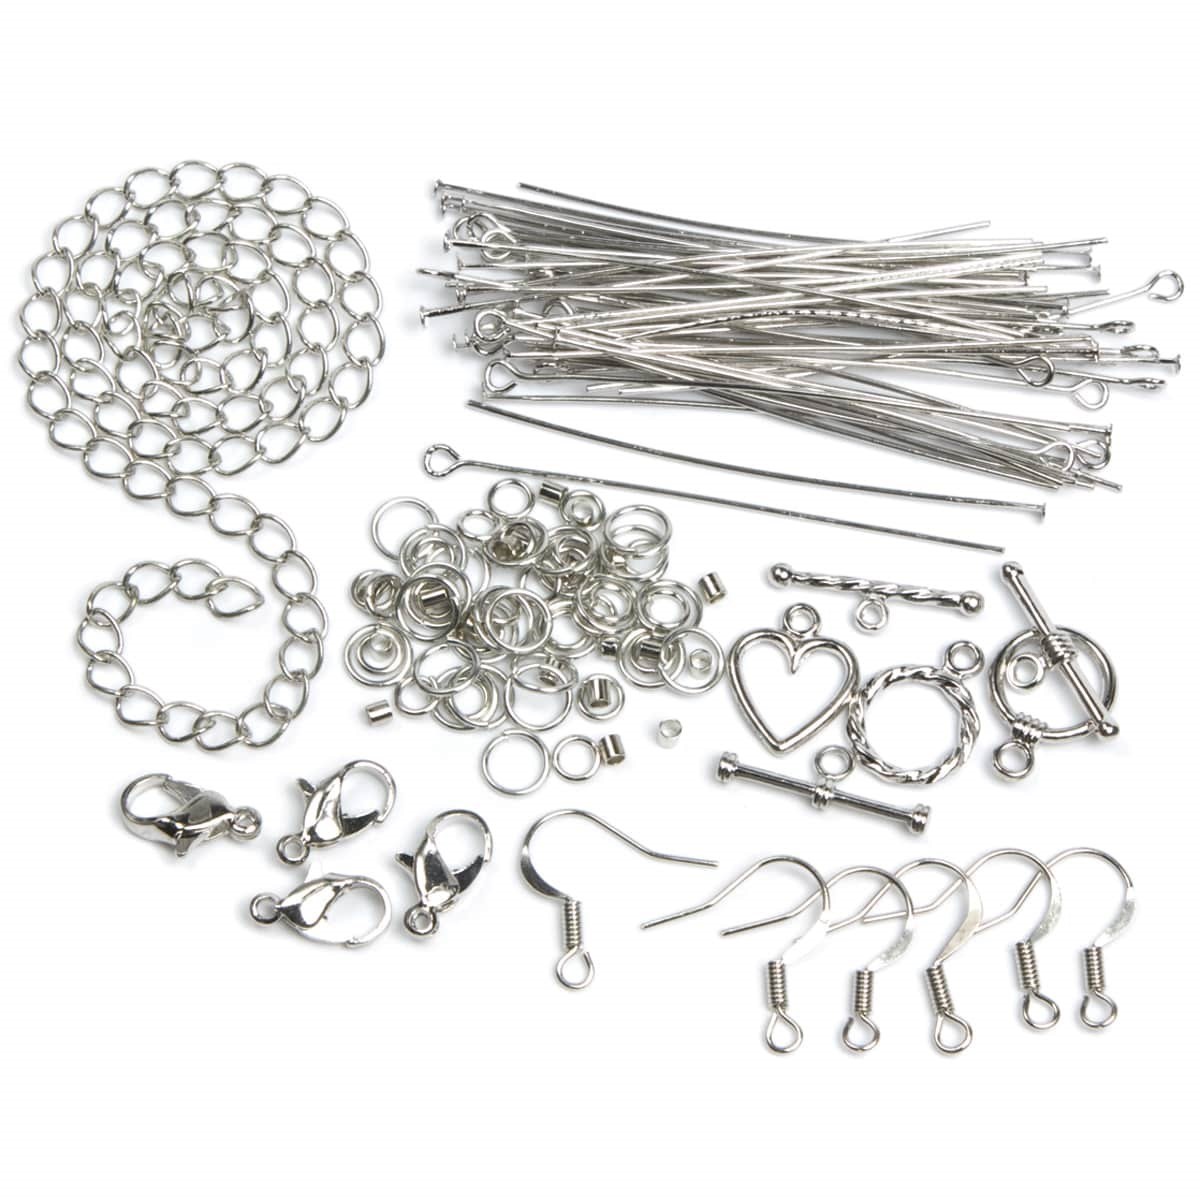 Cousin Jewelry Basics Metal Findings, 134pk, Silver, Starter Pack - image 2 of 2